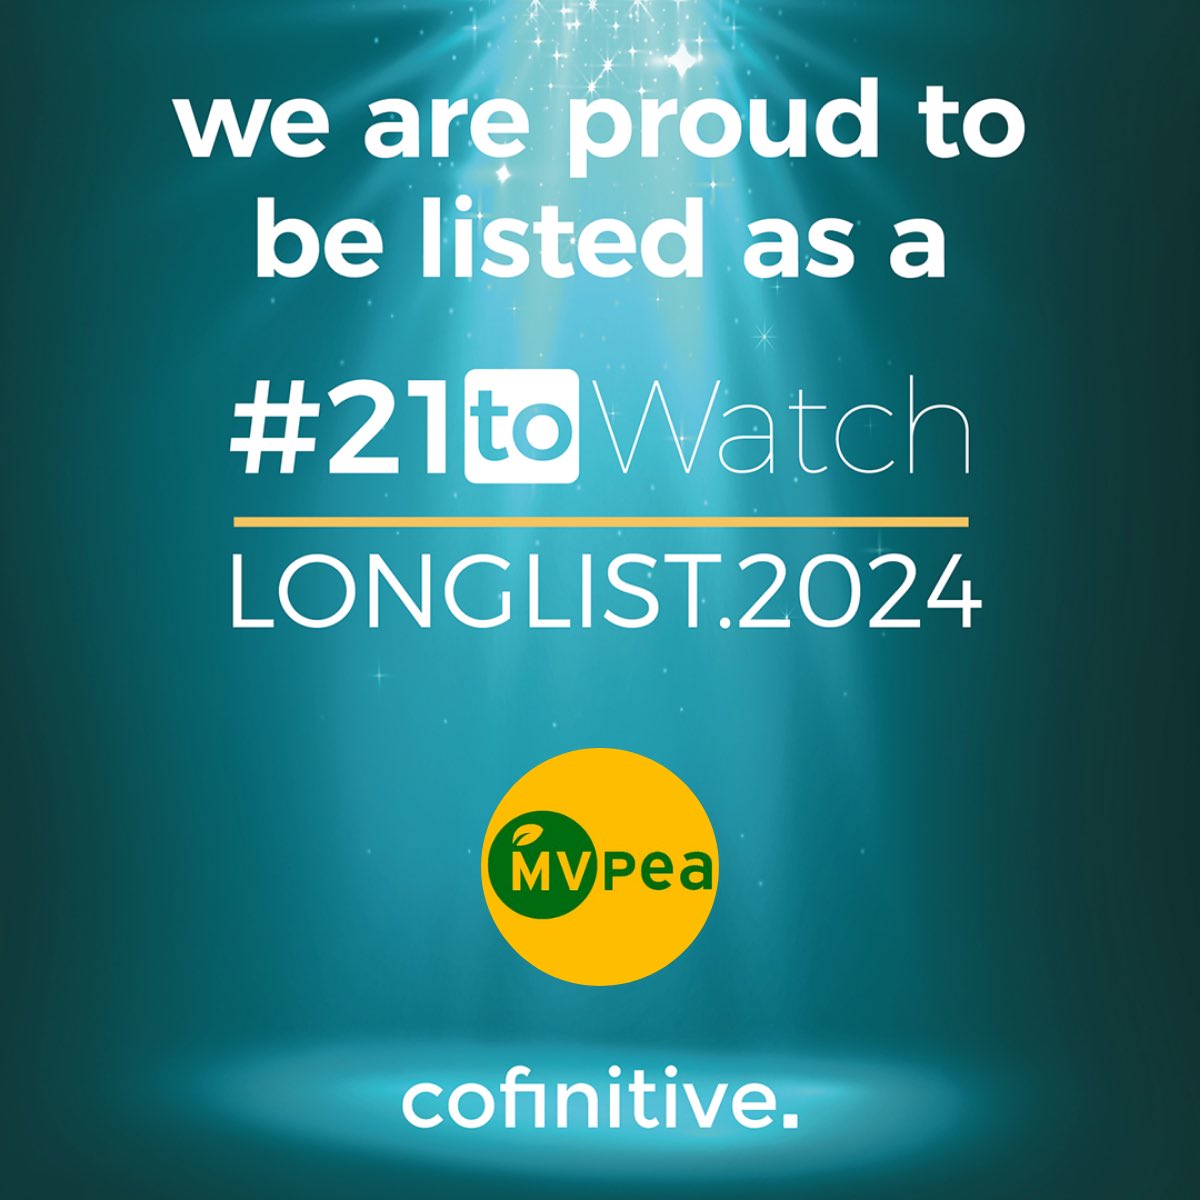 MVPea is sleighing it on the #21toWatch Longlist 2024 by @cofinitive 
🚀 This prestigious annual campaign and awards program highlights the trailblazers in innovation and entrepreneurship across the Eastern region, and we're honored to be part of it. 🎁💚 #21toWatch #Startup